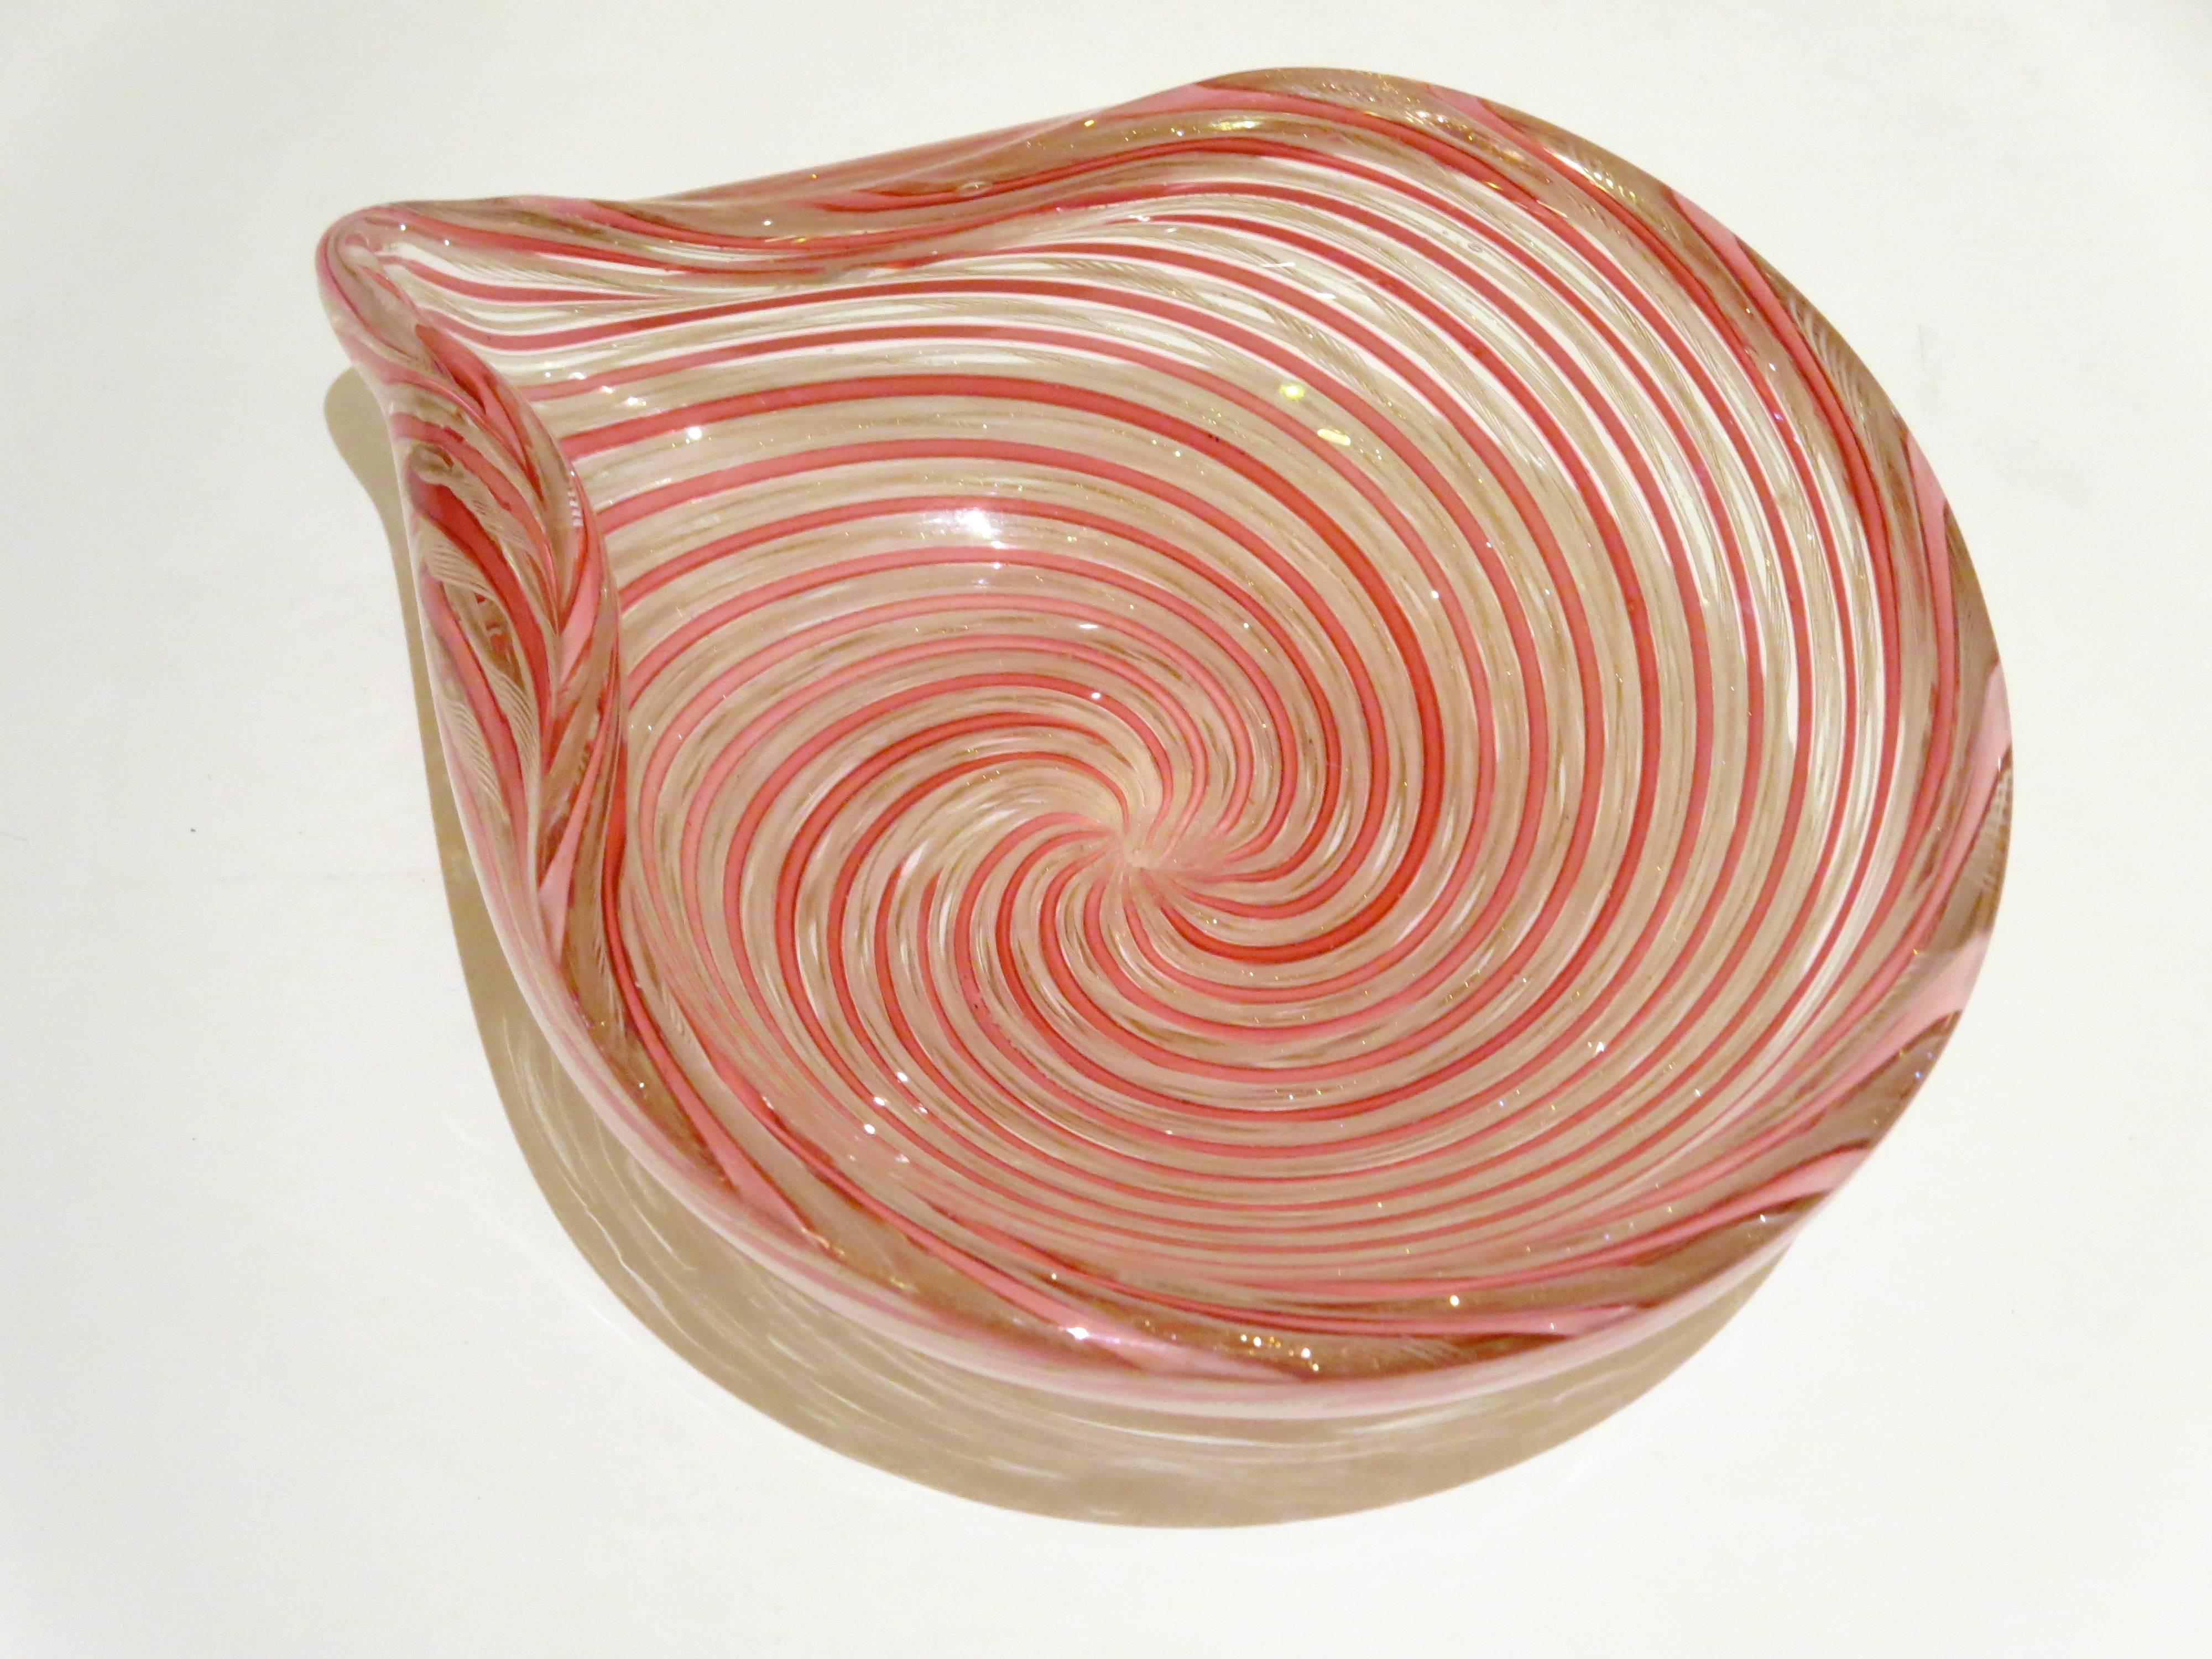 Beautiful Italian blown glass bowl, nice swirl in red pink and sparkles of gold, excellent condition no chips or cracks.